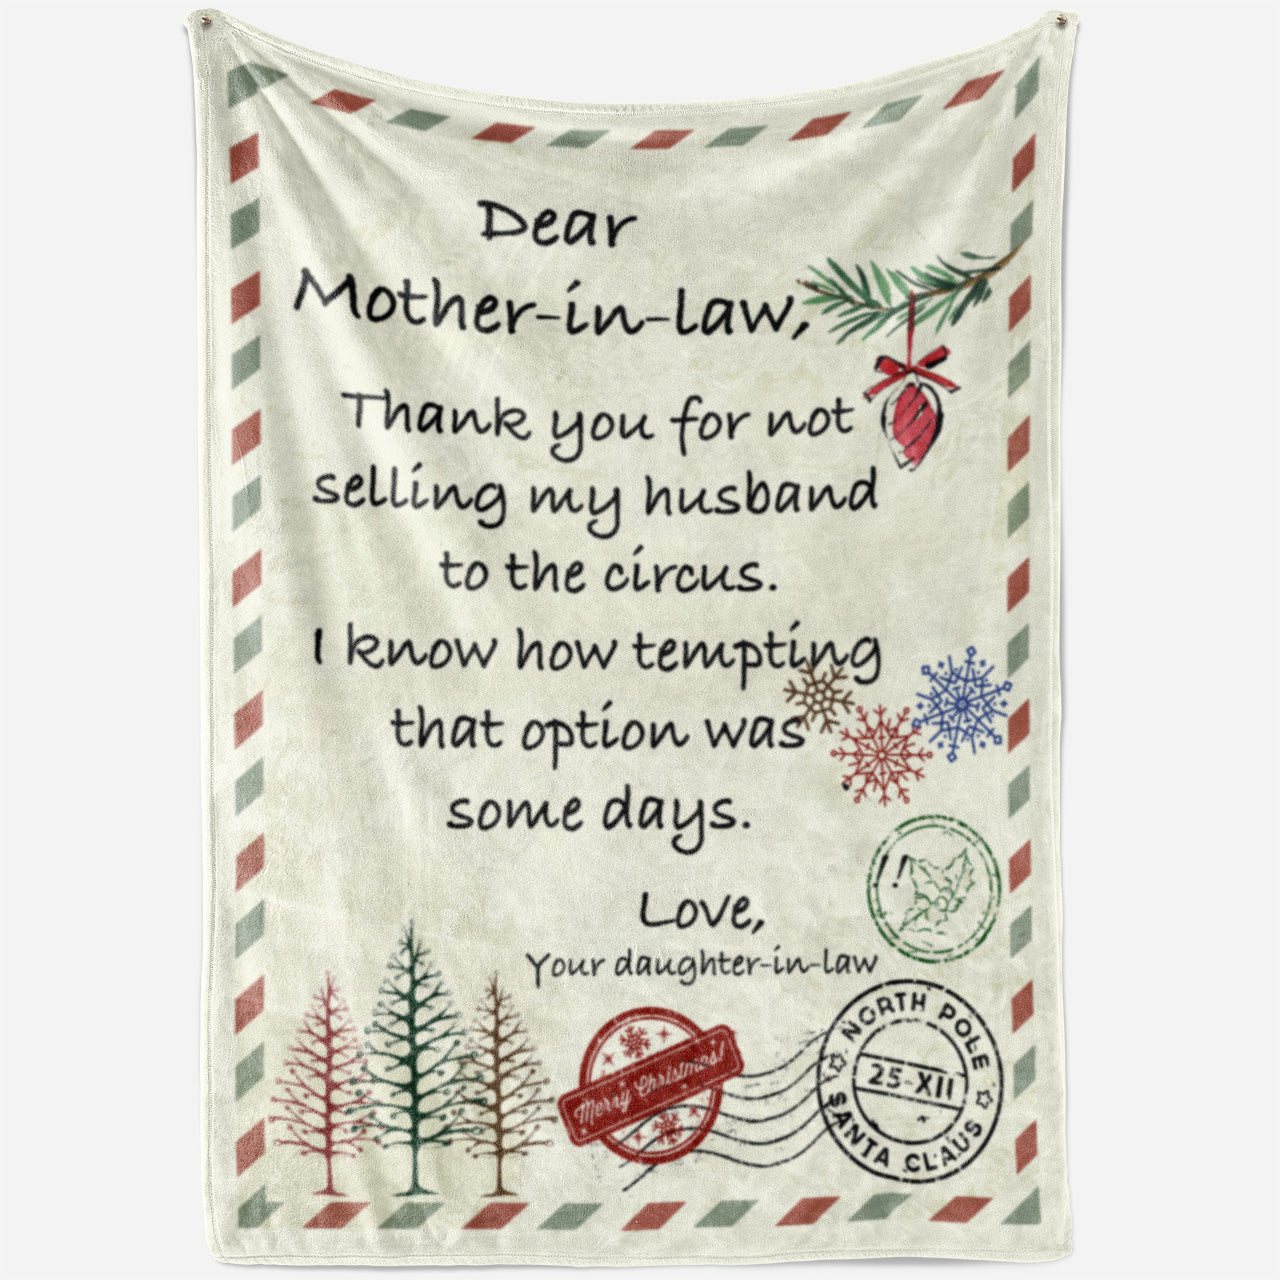 Funny Blanket Christmas Gift Ideas for Mother in Law 20112810 - Sherpa Blanket